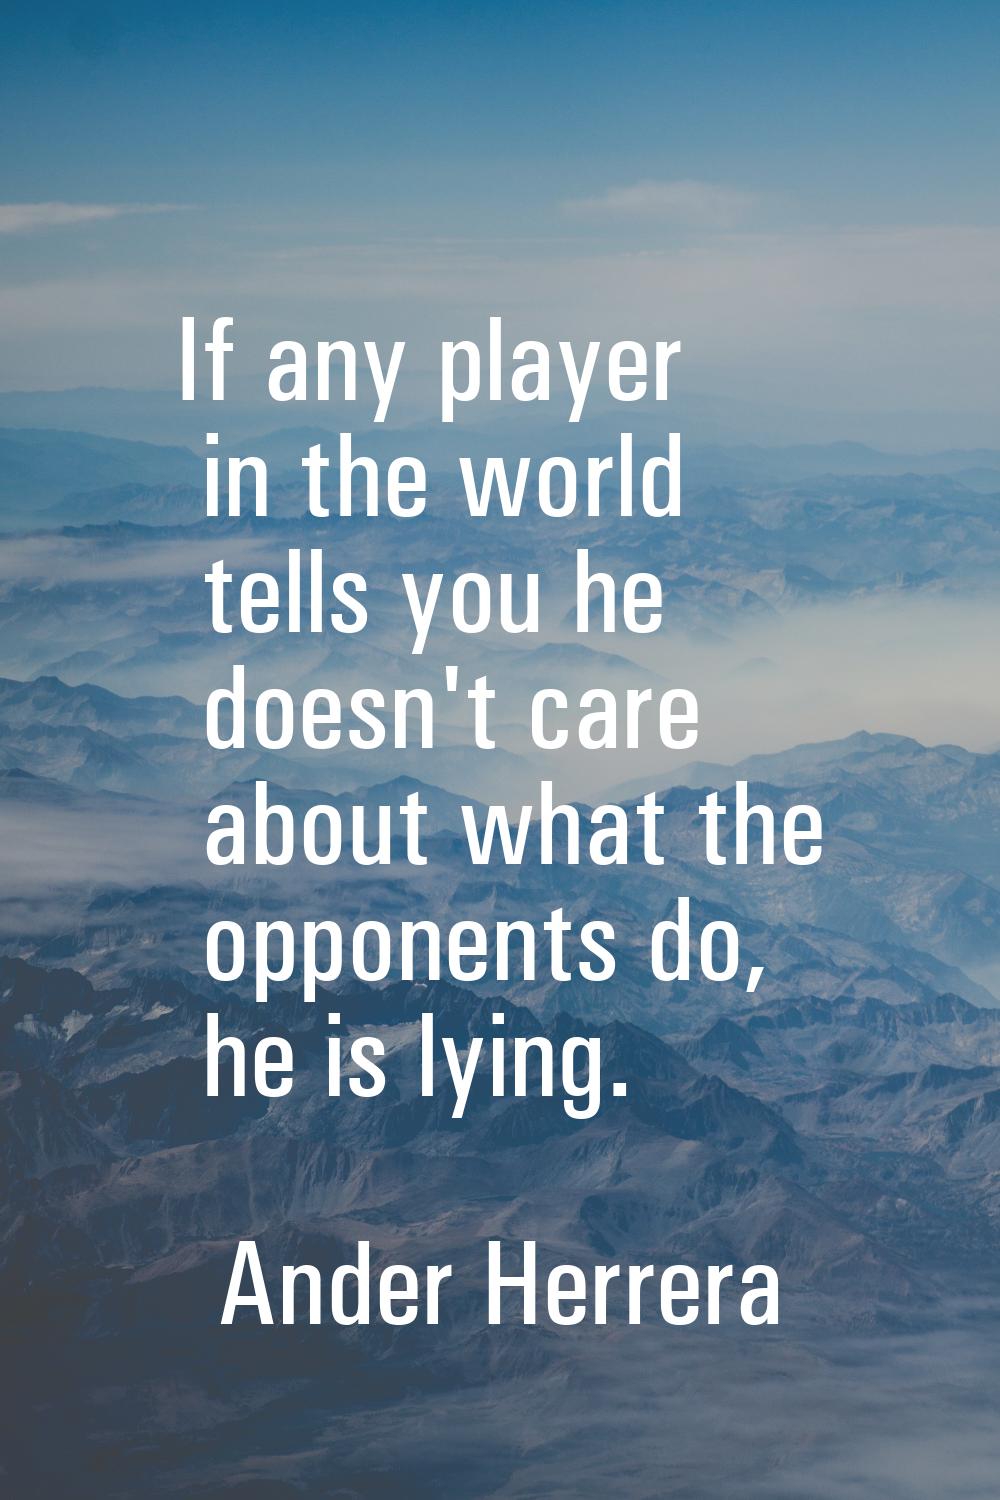 If any player in the world tells you he doesn't care about what the opponents do, he is lying.